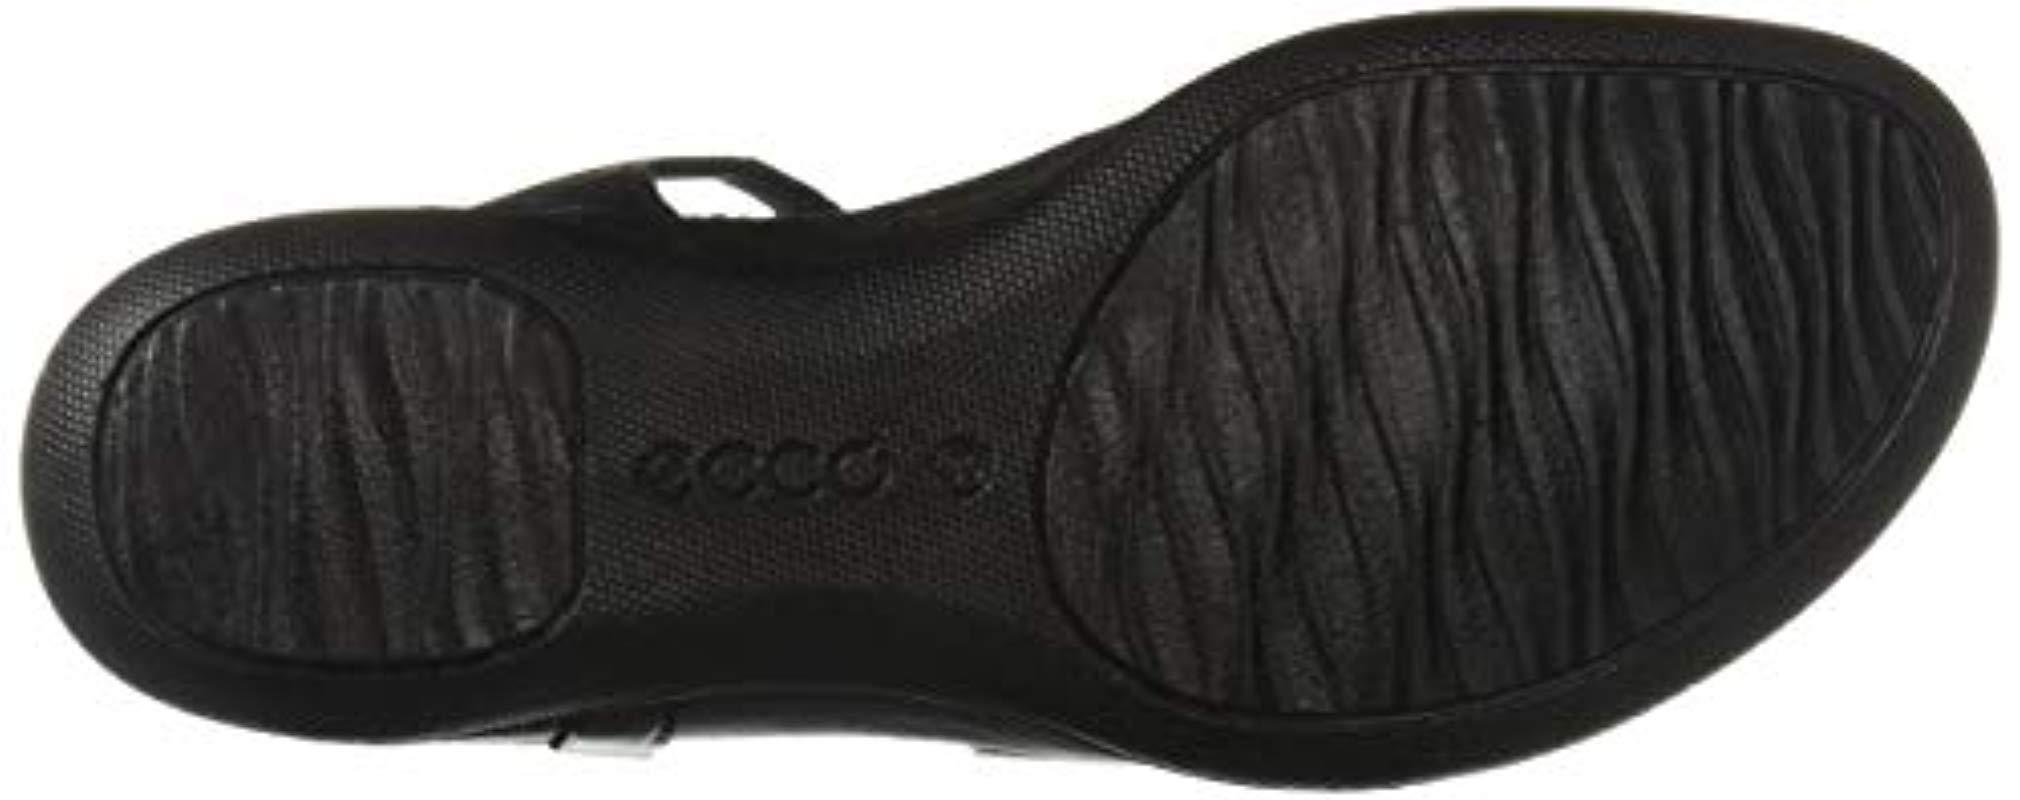 Ecco Leather Flash T-strap Sandal in Black - Save 53% | Lyst UK